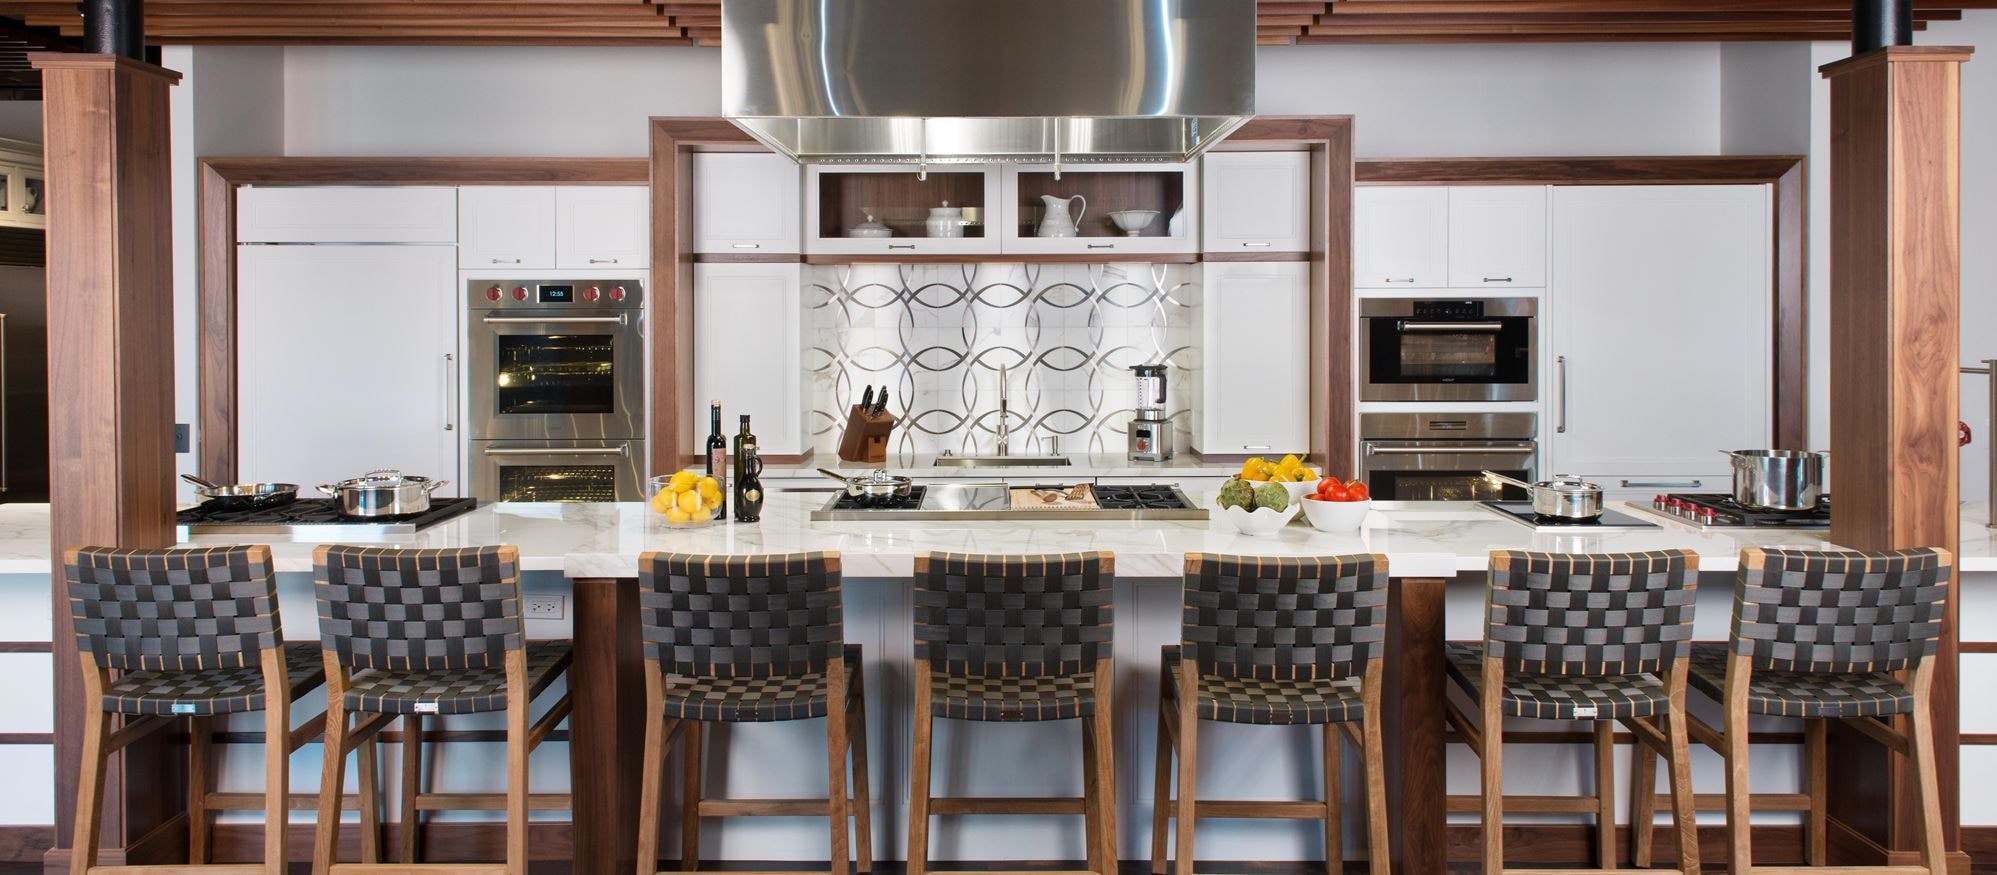 Explore ideas for your new kitchen at Sub-Zero, Wolf and Cove Showroom in Boston, Massachusetts